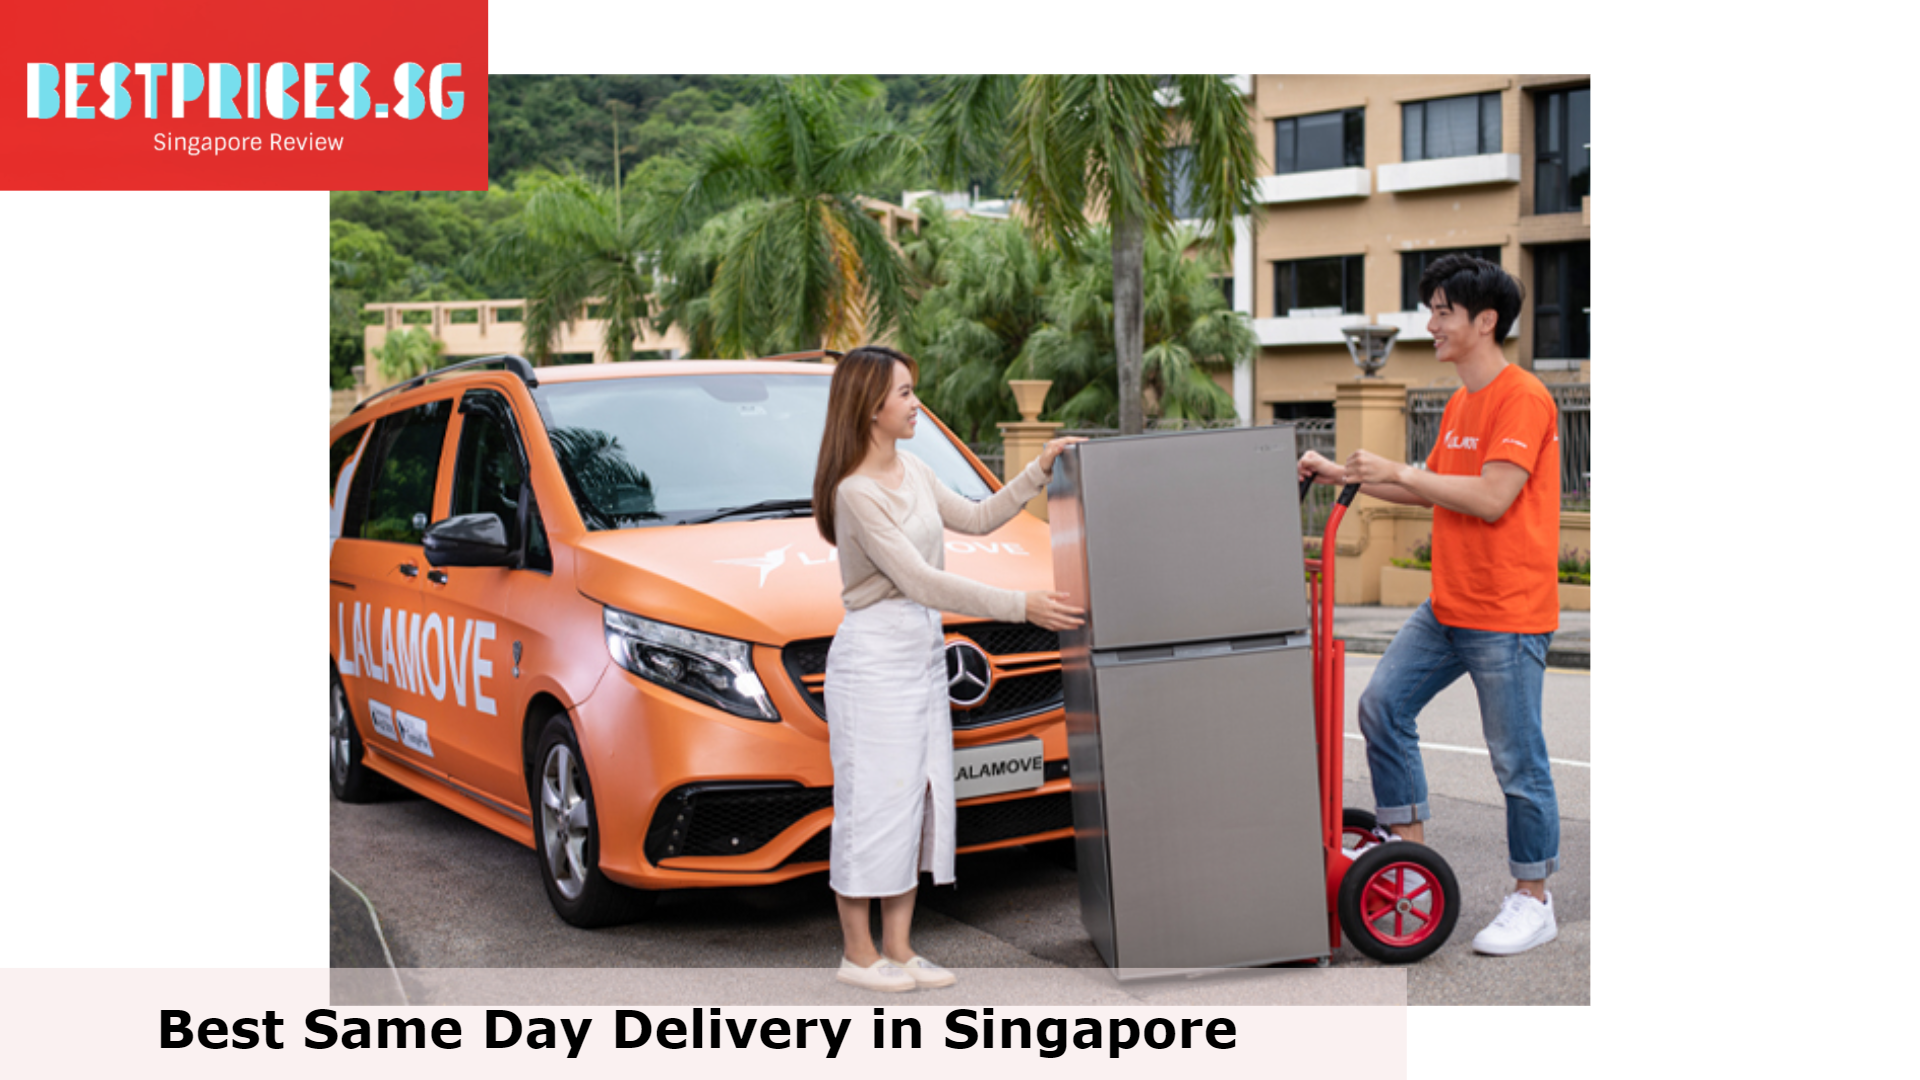 Lalamove - Best Same Day Delivery in Singapore, Same Day Delivery Singapore, Express Delivery in 1 hour, Same Day Delivery Courier Options In Singapore, Same-Day Delivery Gifts In Singapore, Best Courier Services in Singapore, Which delivery app is the cheapest Singapore?, Which courier service has lowest fees?, cheapest same day delivery singapore, same day delivery singapore gifts, same day delivery online shopping singapore, same day delivery singapore food, birthday gift same day delivery singapore, door to door delivery singapore, same day delivery singapore cake, same day delivery singapore flowers, 